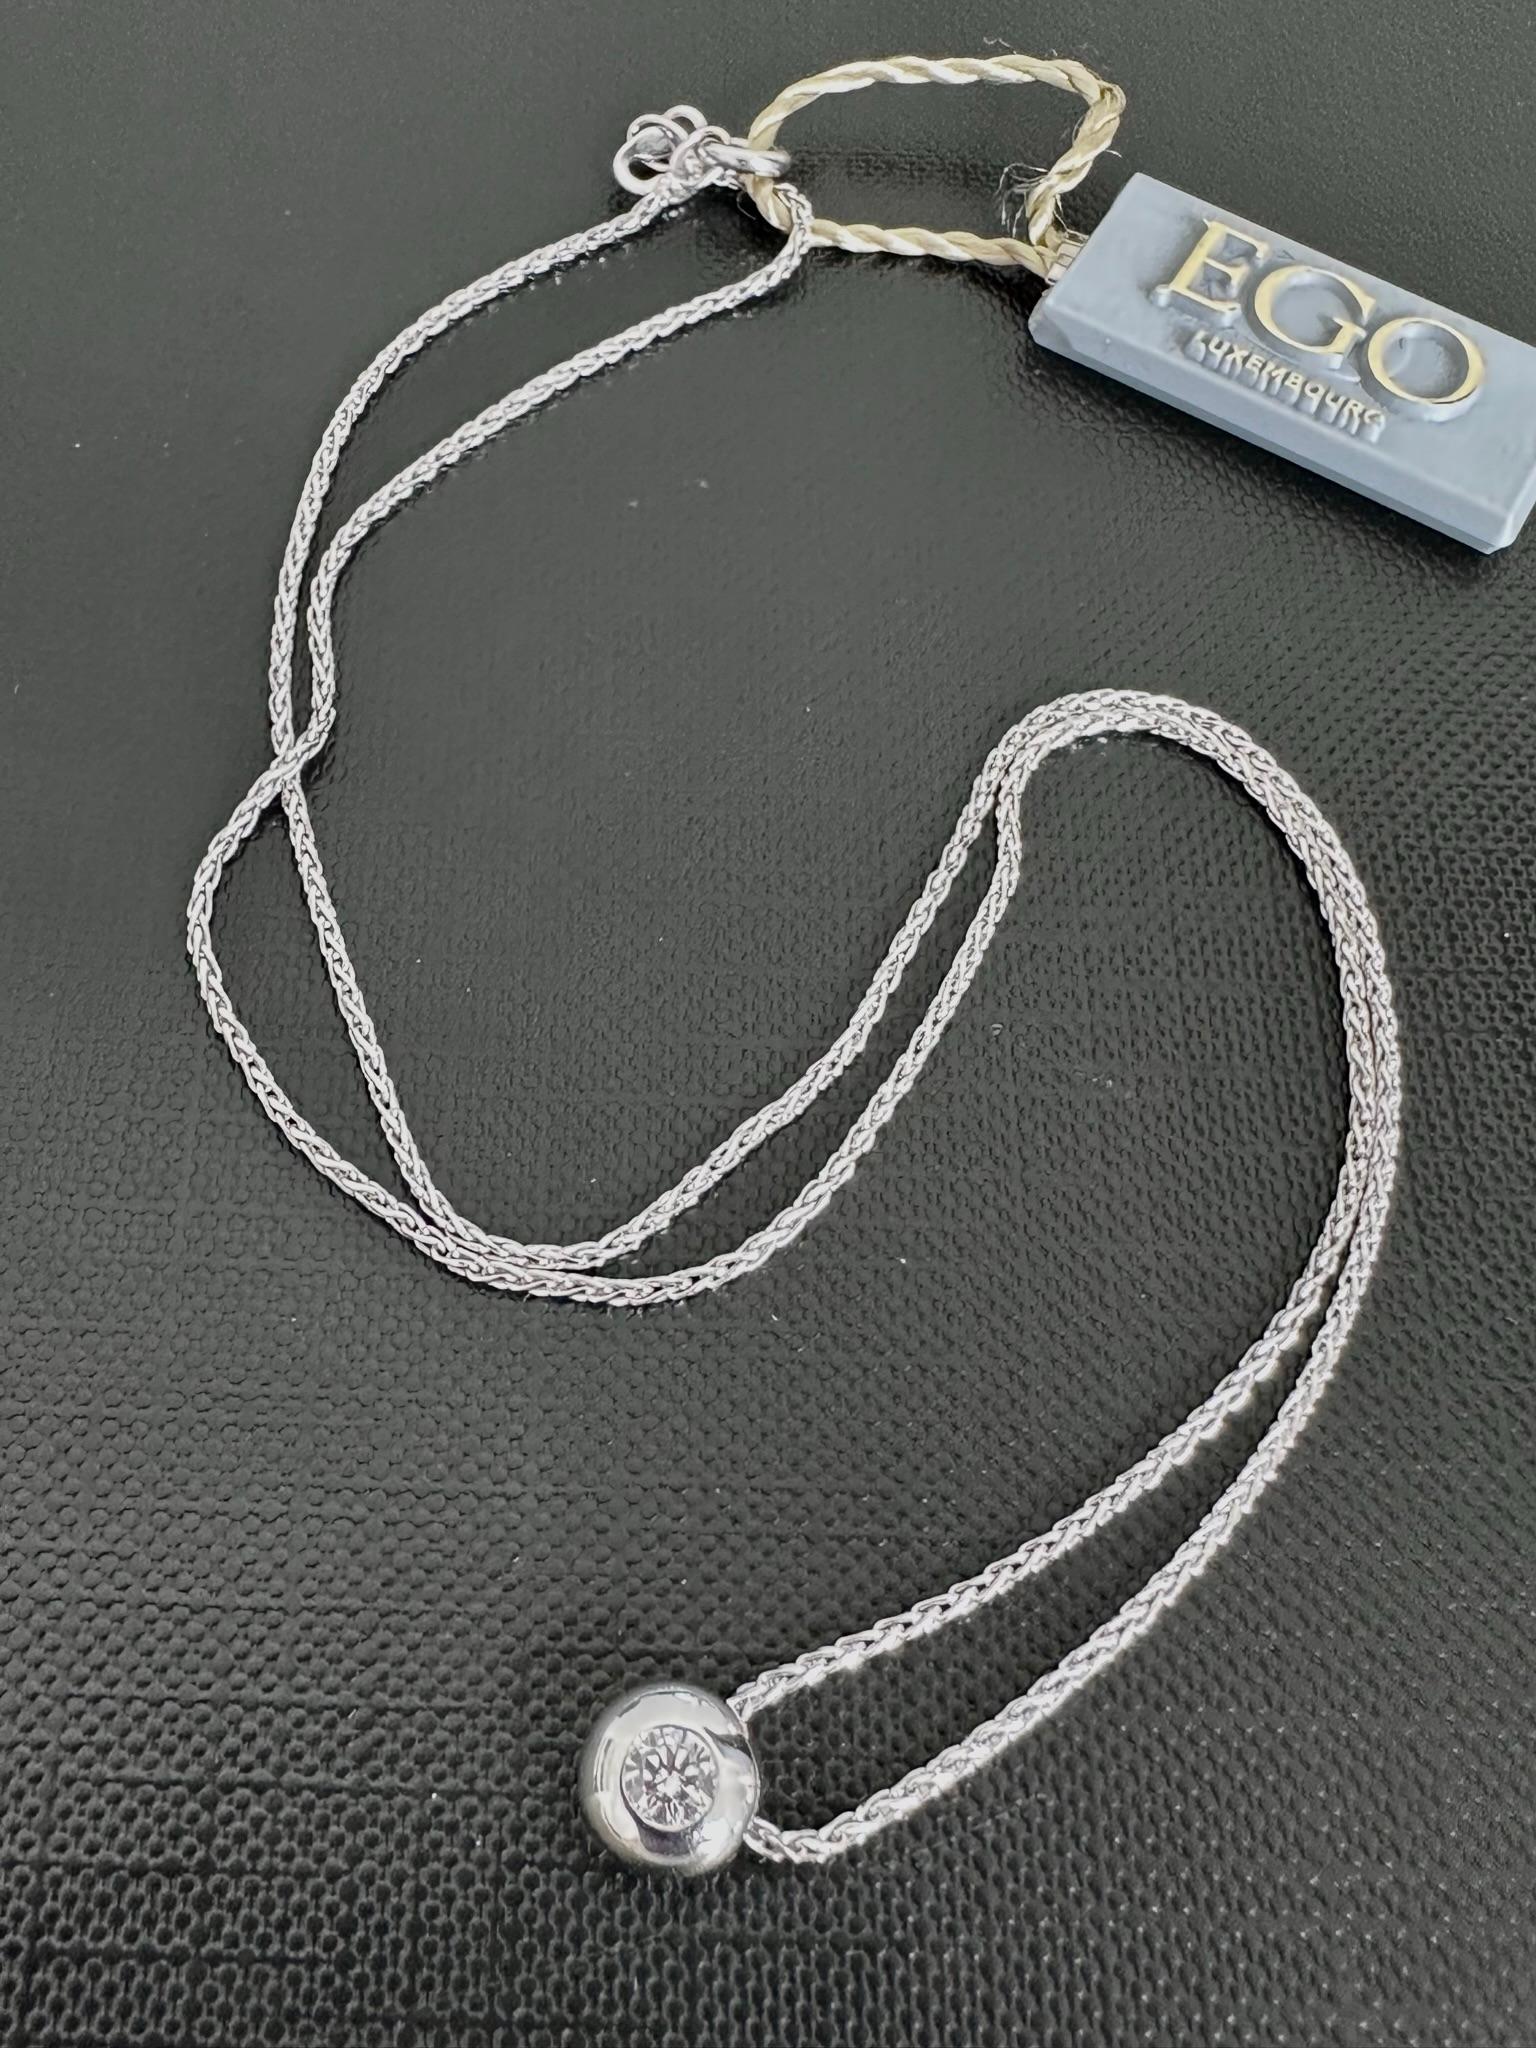 Diamond Solitaire Necklace with Chain 18 karat White Gold In Good Condition For Sale In Esch-Sur-Alzette, LU